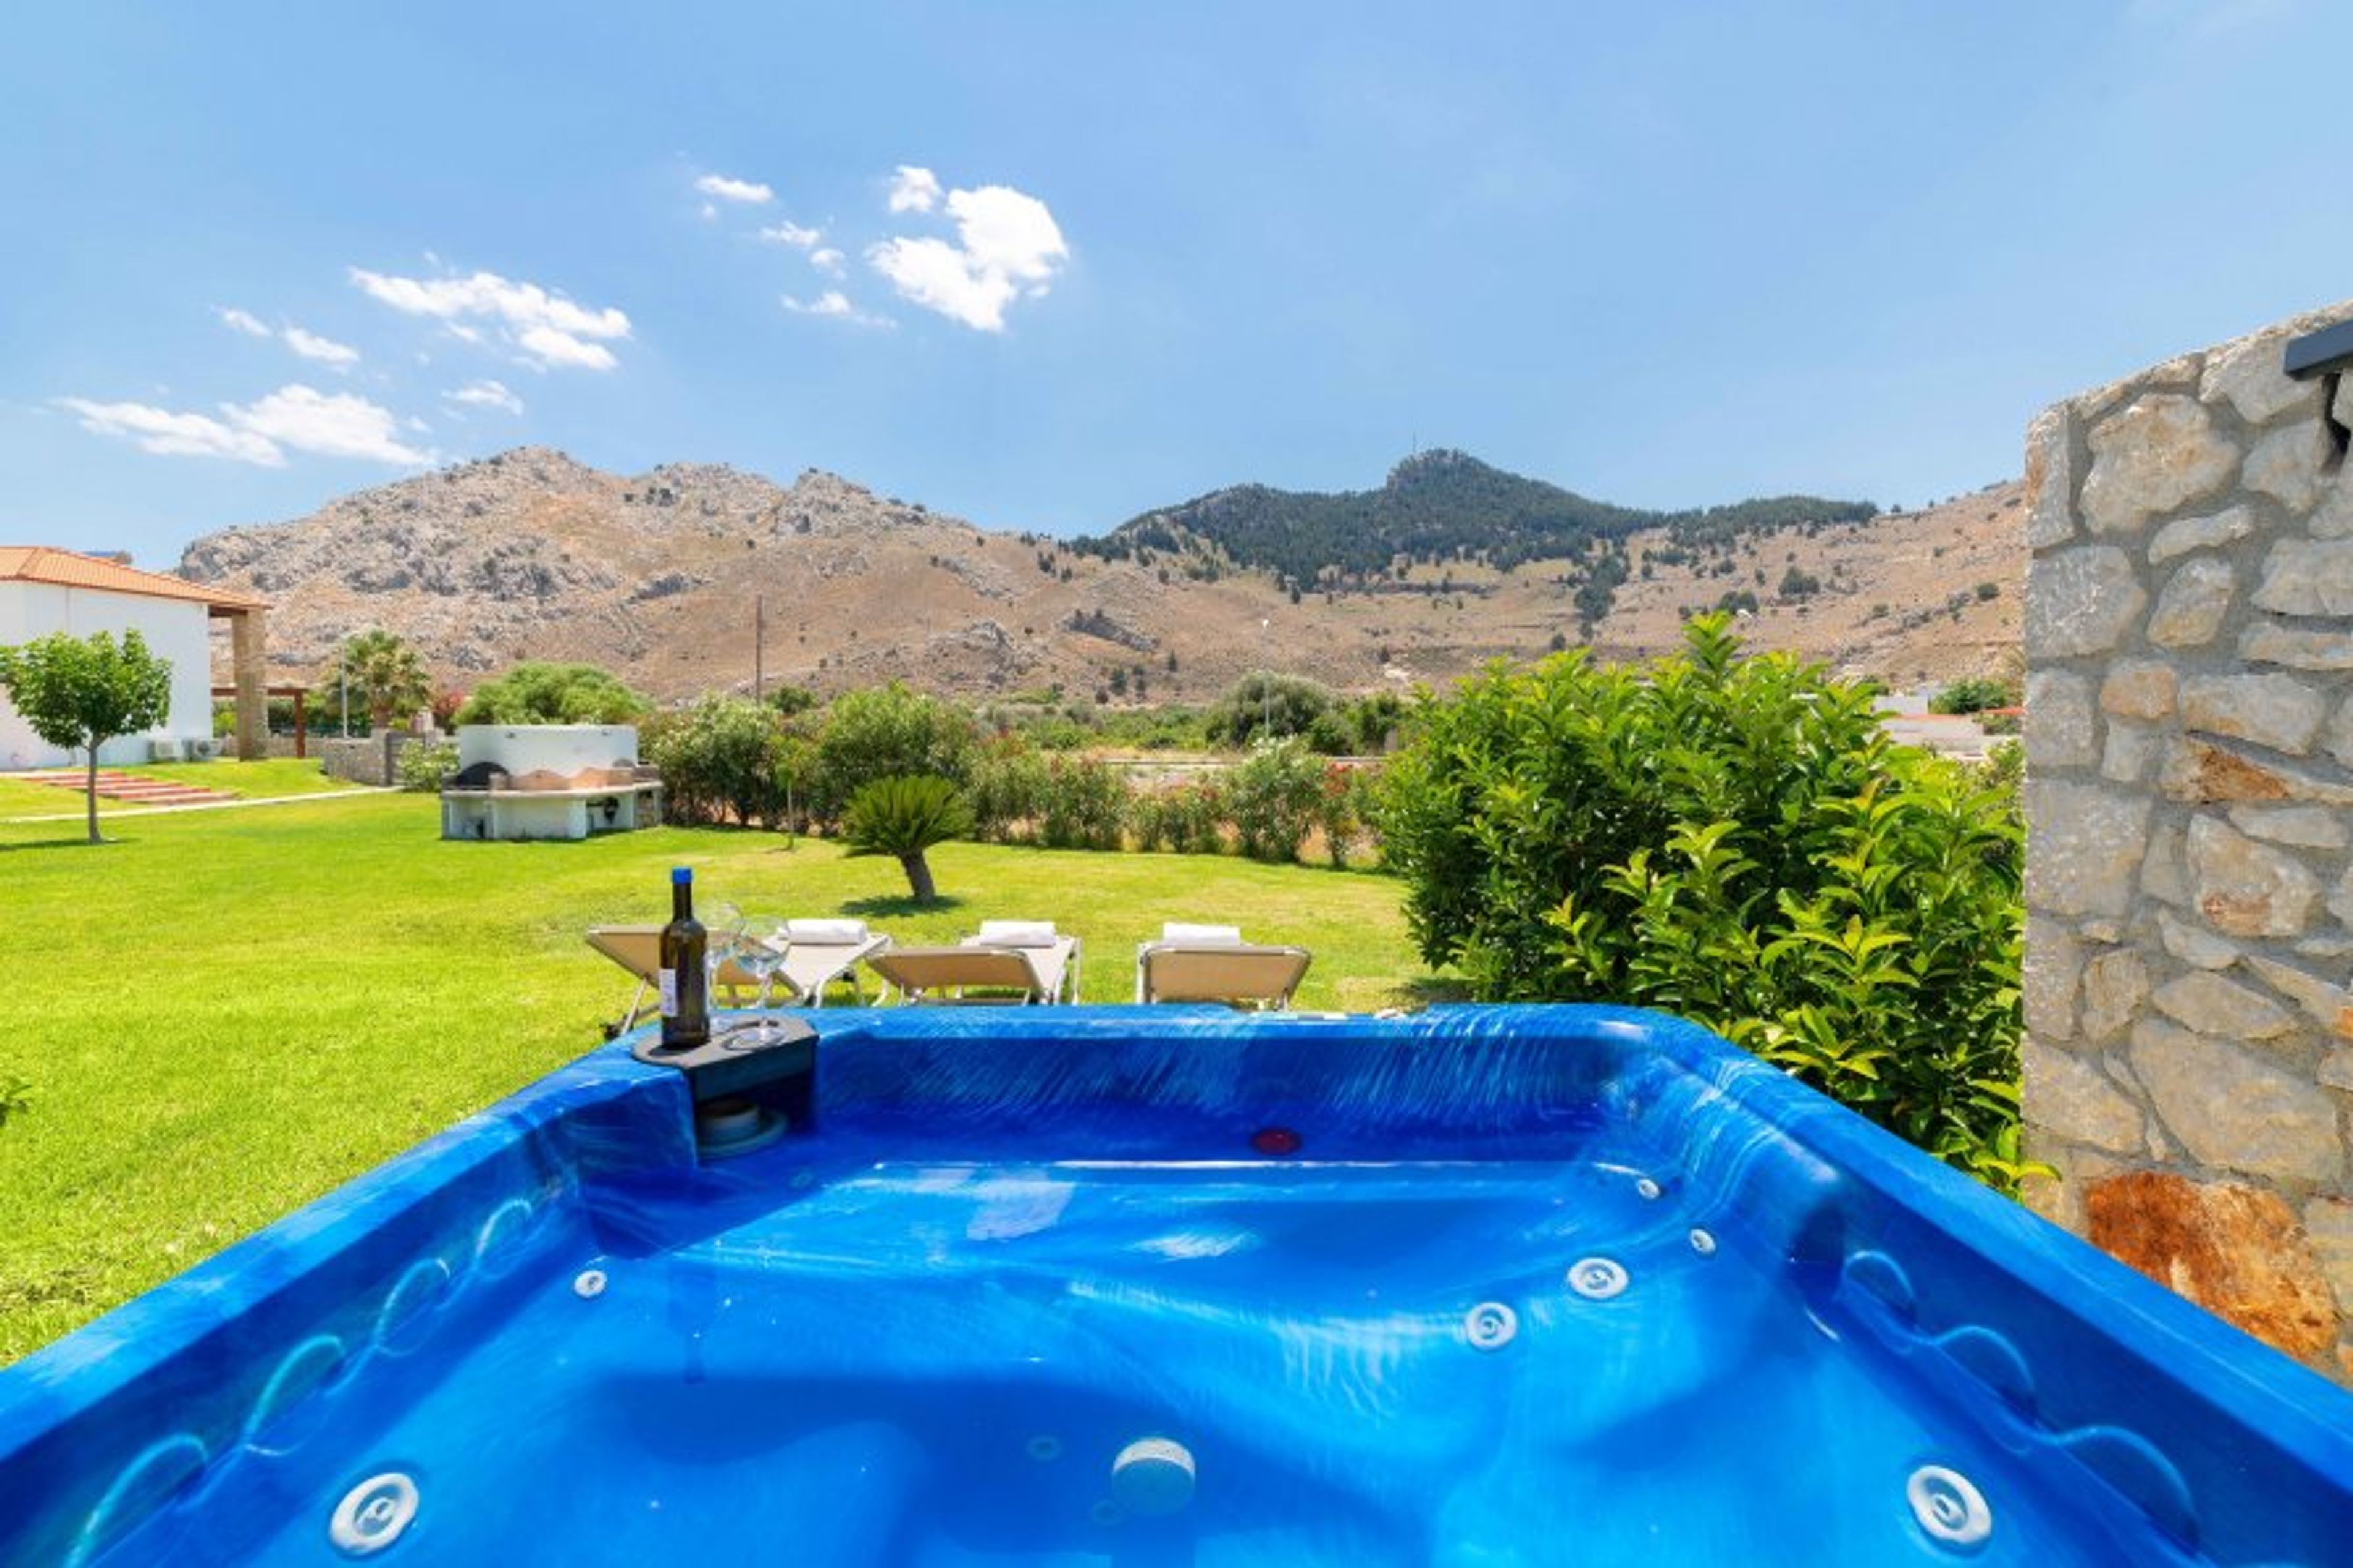 Private jacuzzi on your patio with mountains views